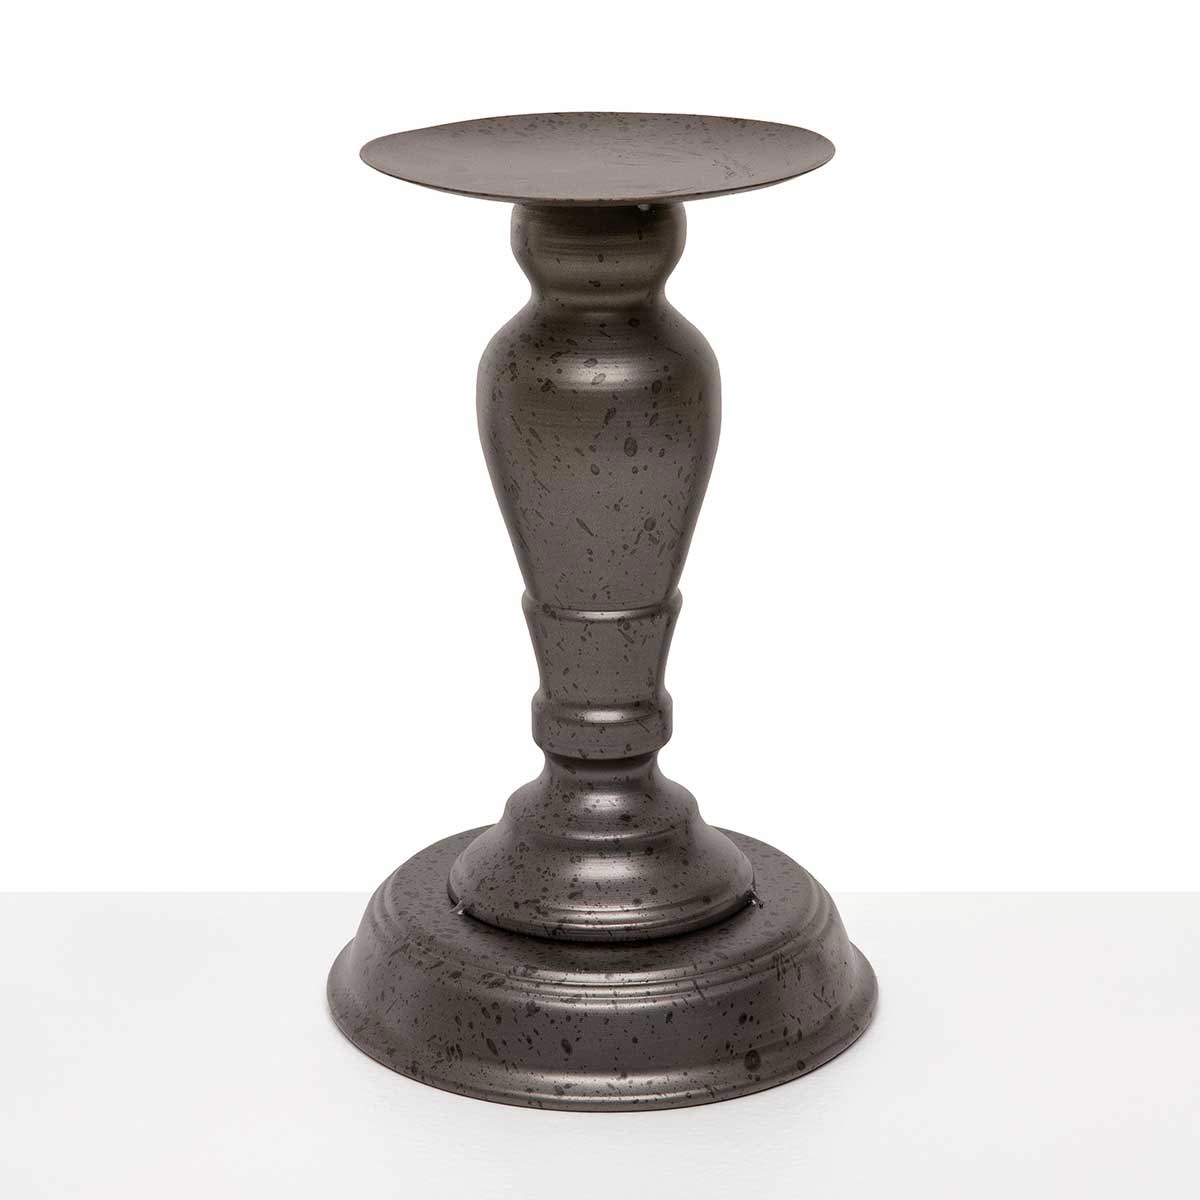 CANDLEHOLDER PEWTER LARGE 6IN X 9.25IN METAL